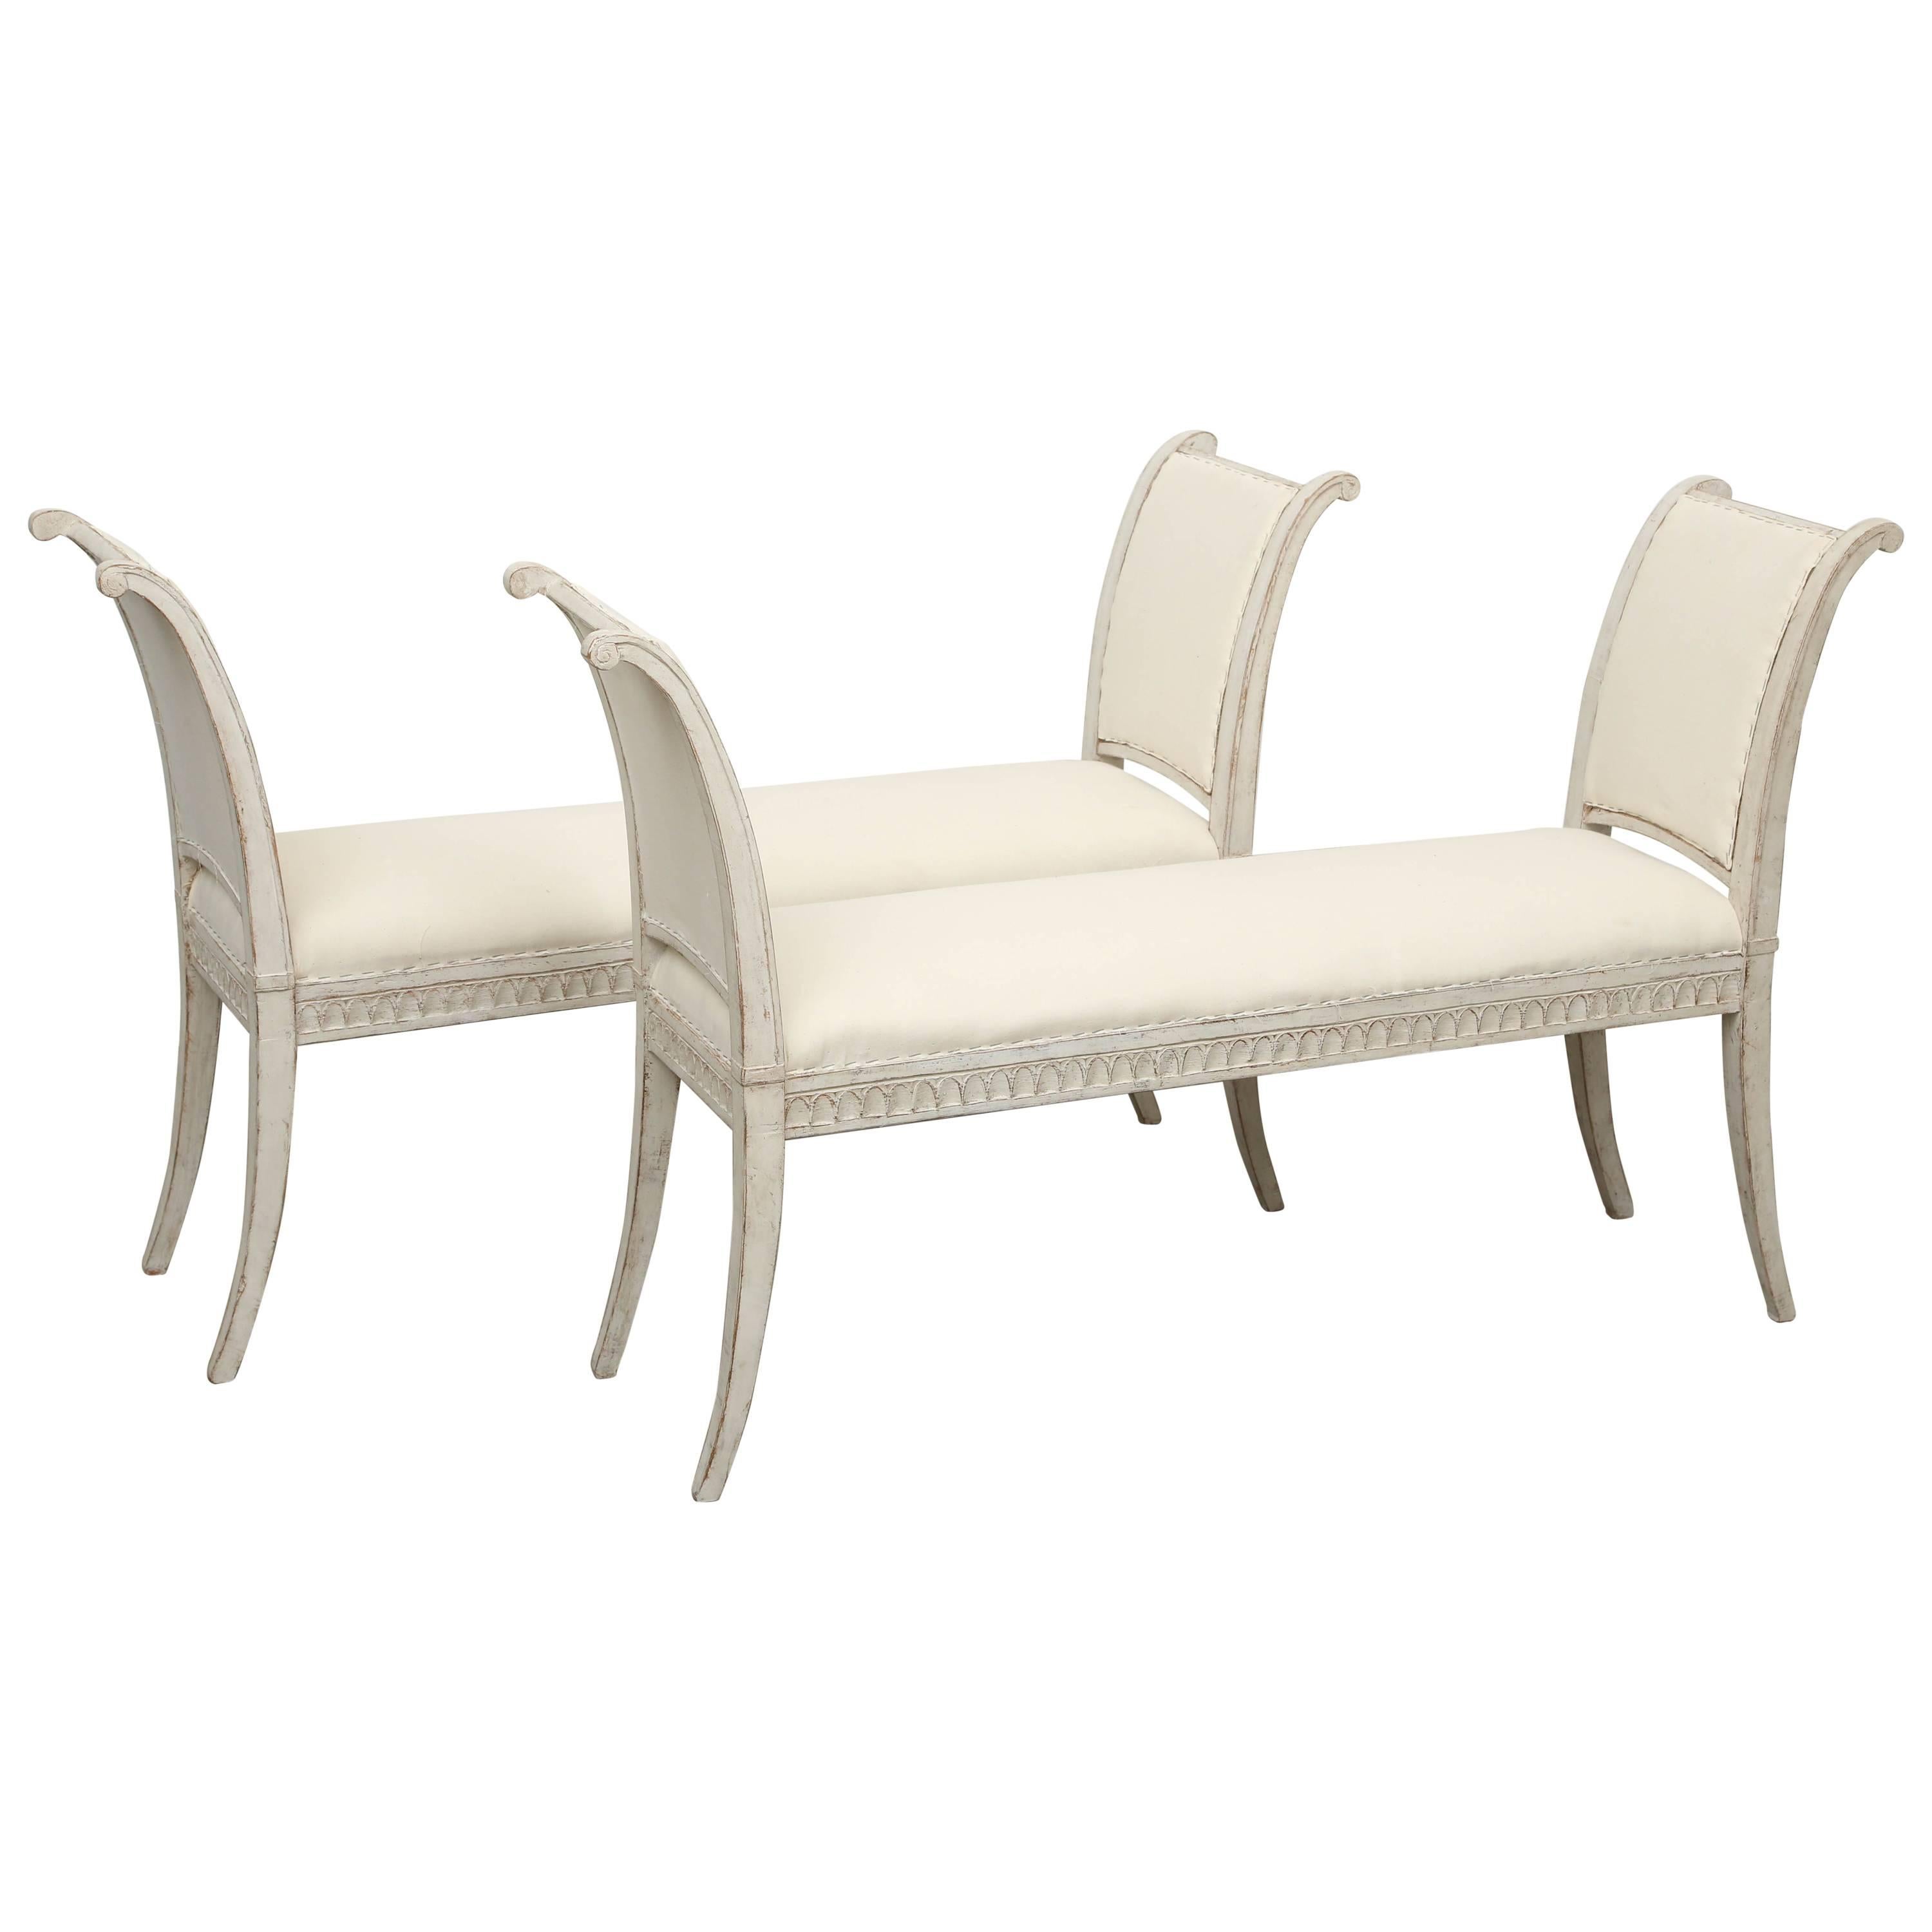 Pair of Antique Swedish Gustavian Benches with Curved Arms, Mid-19th Century